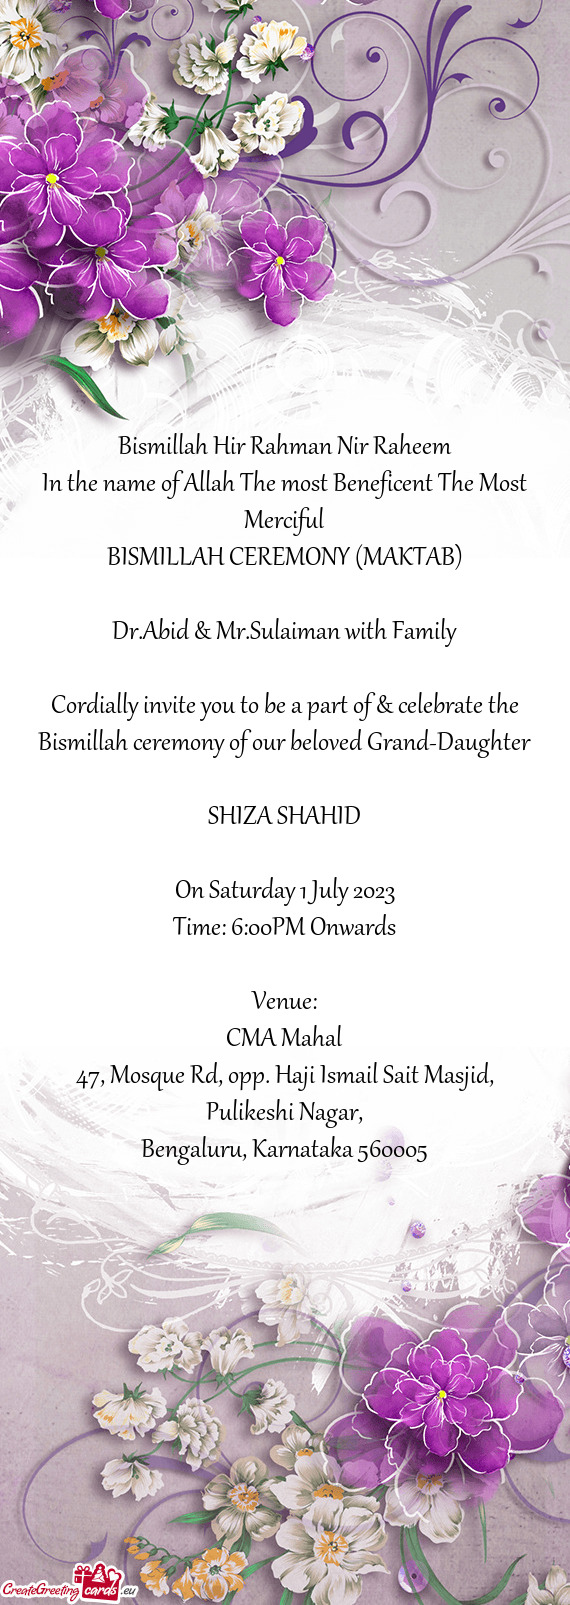 Cordially invite you to be a part of & celebrate the Bismillah ceremony of our beloved Grand-Daughte